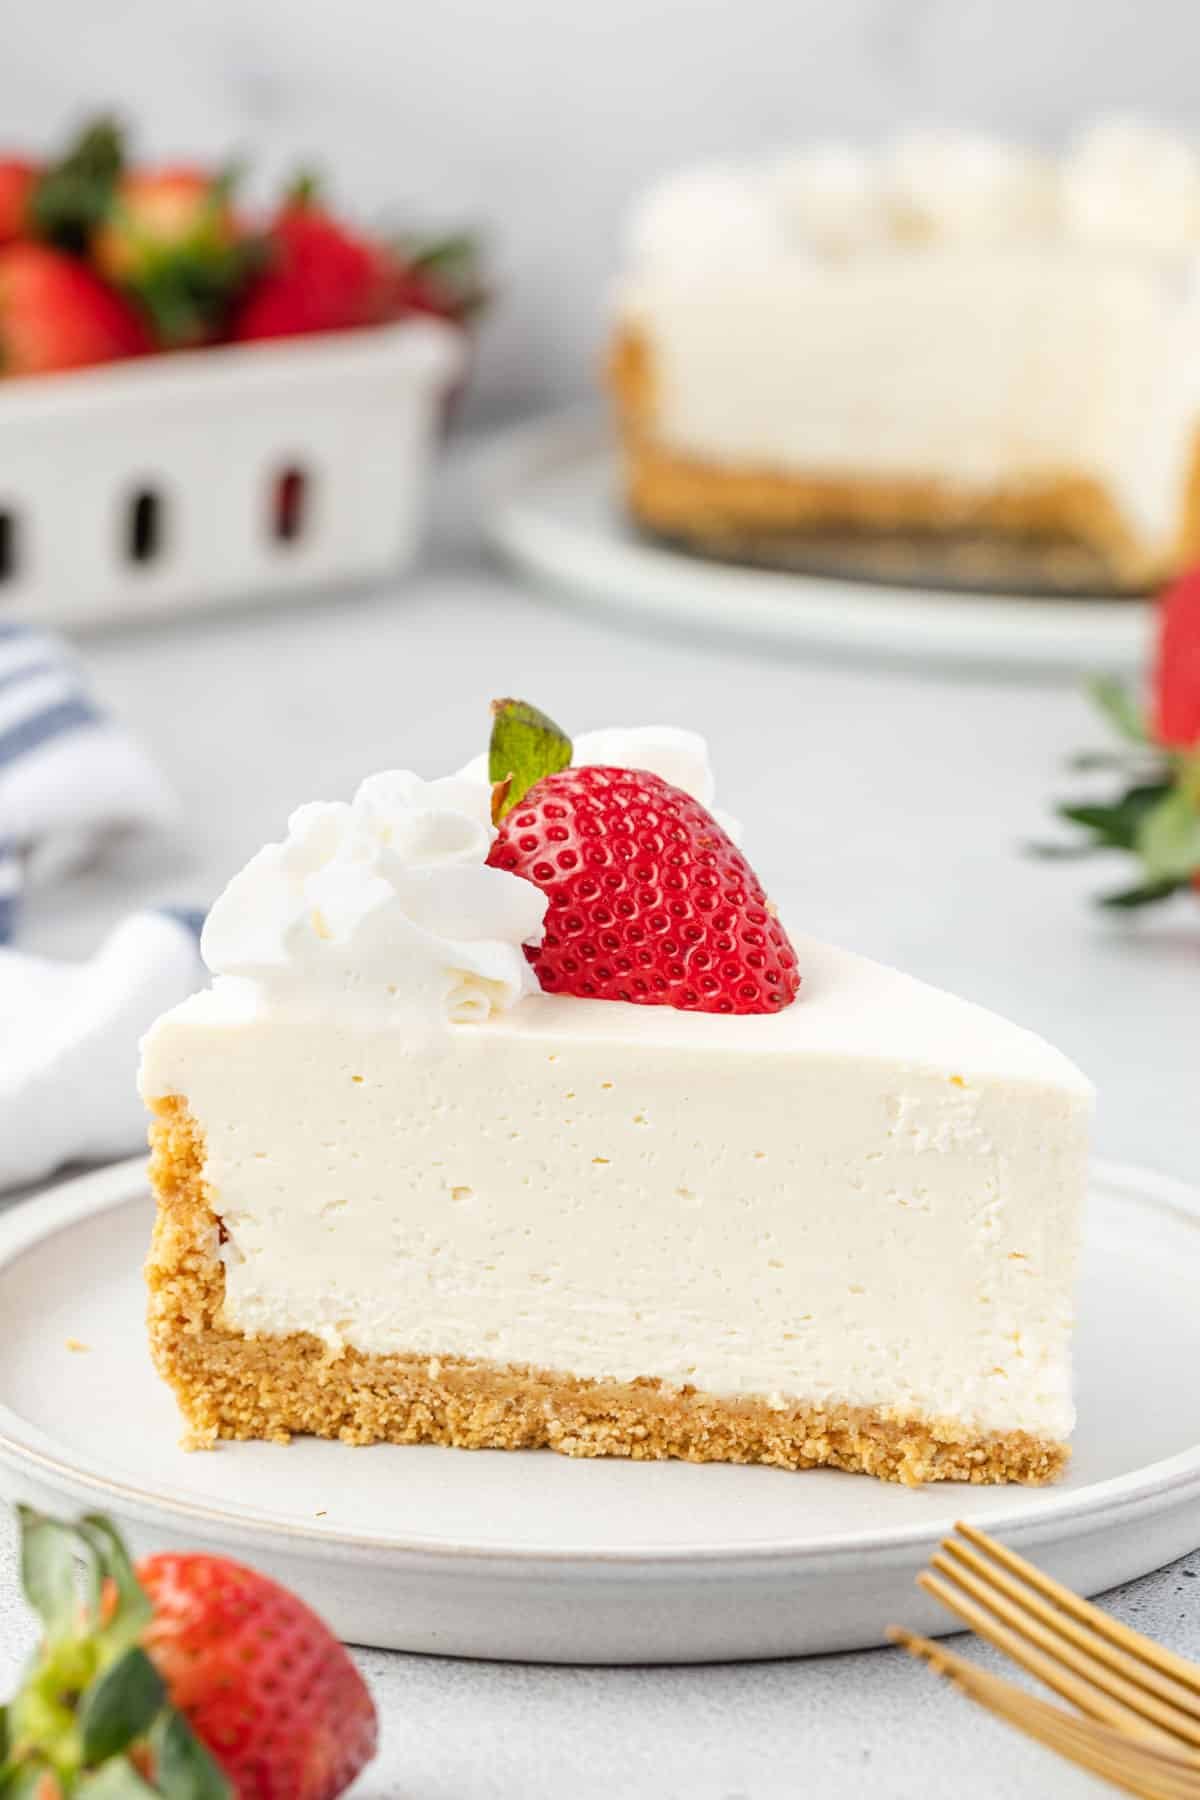 Side view of cheesecake on a plate showing creamy, smooth consistency.